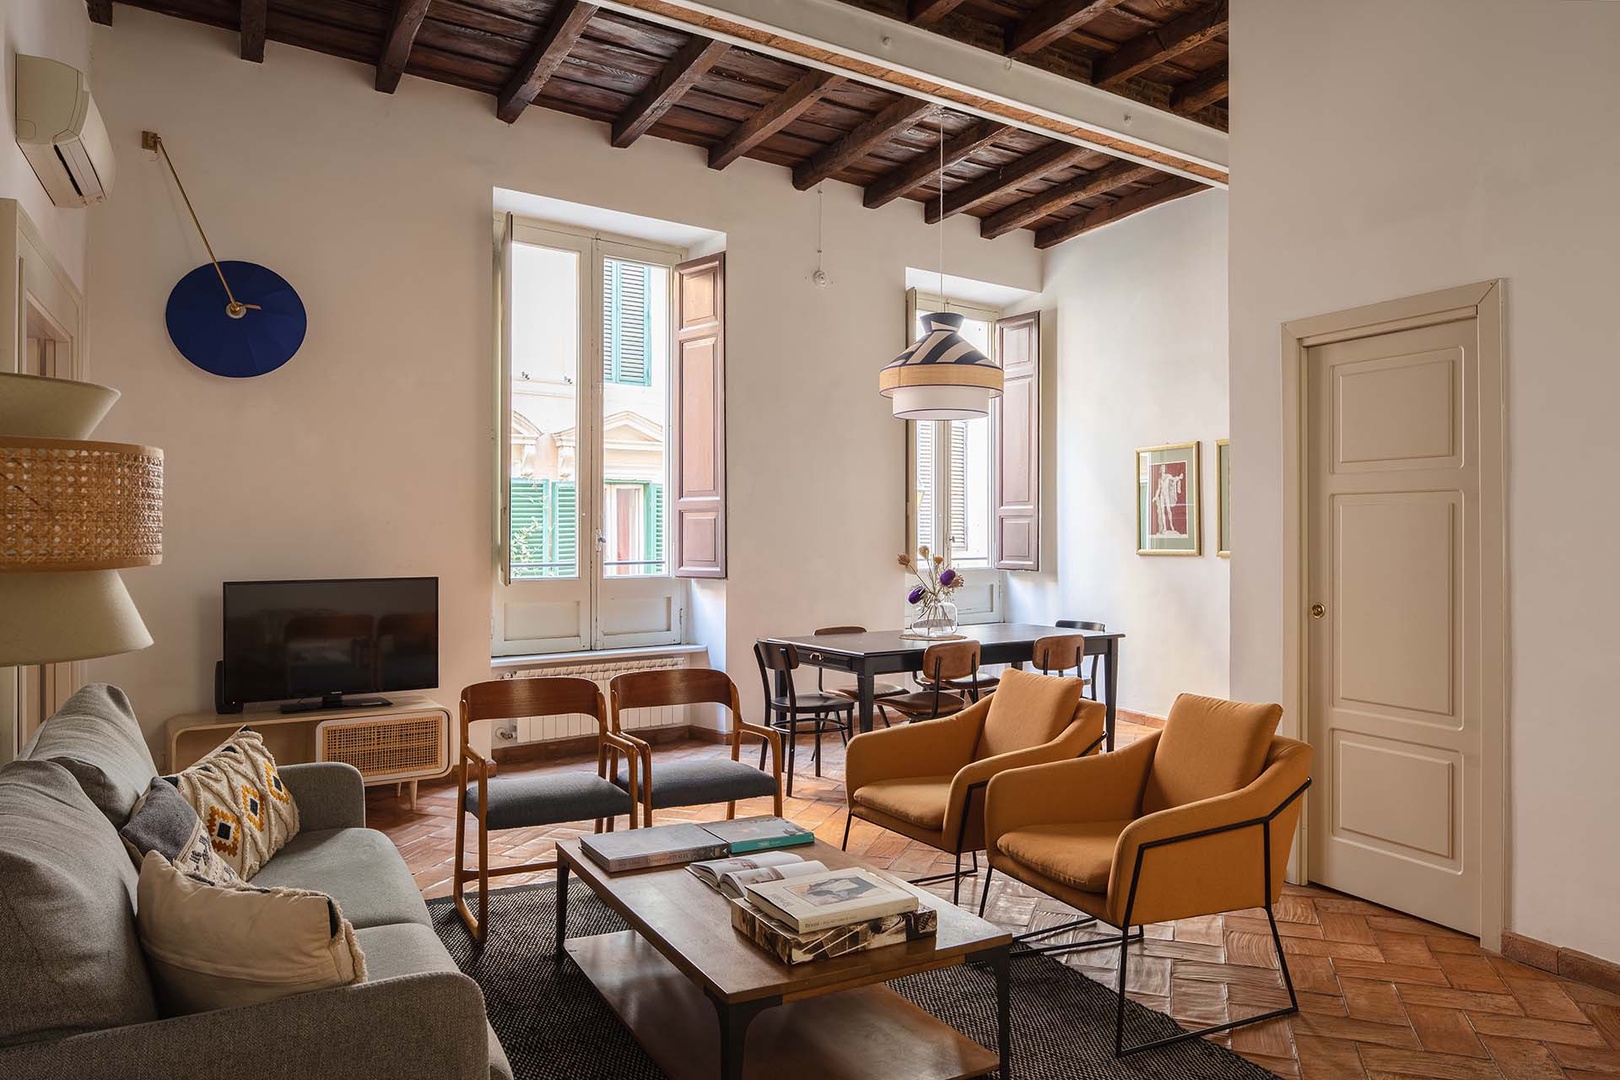 Welcome to the spacious Umberto apartment in the heart of Rome.